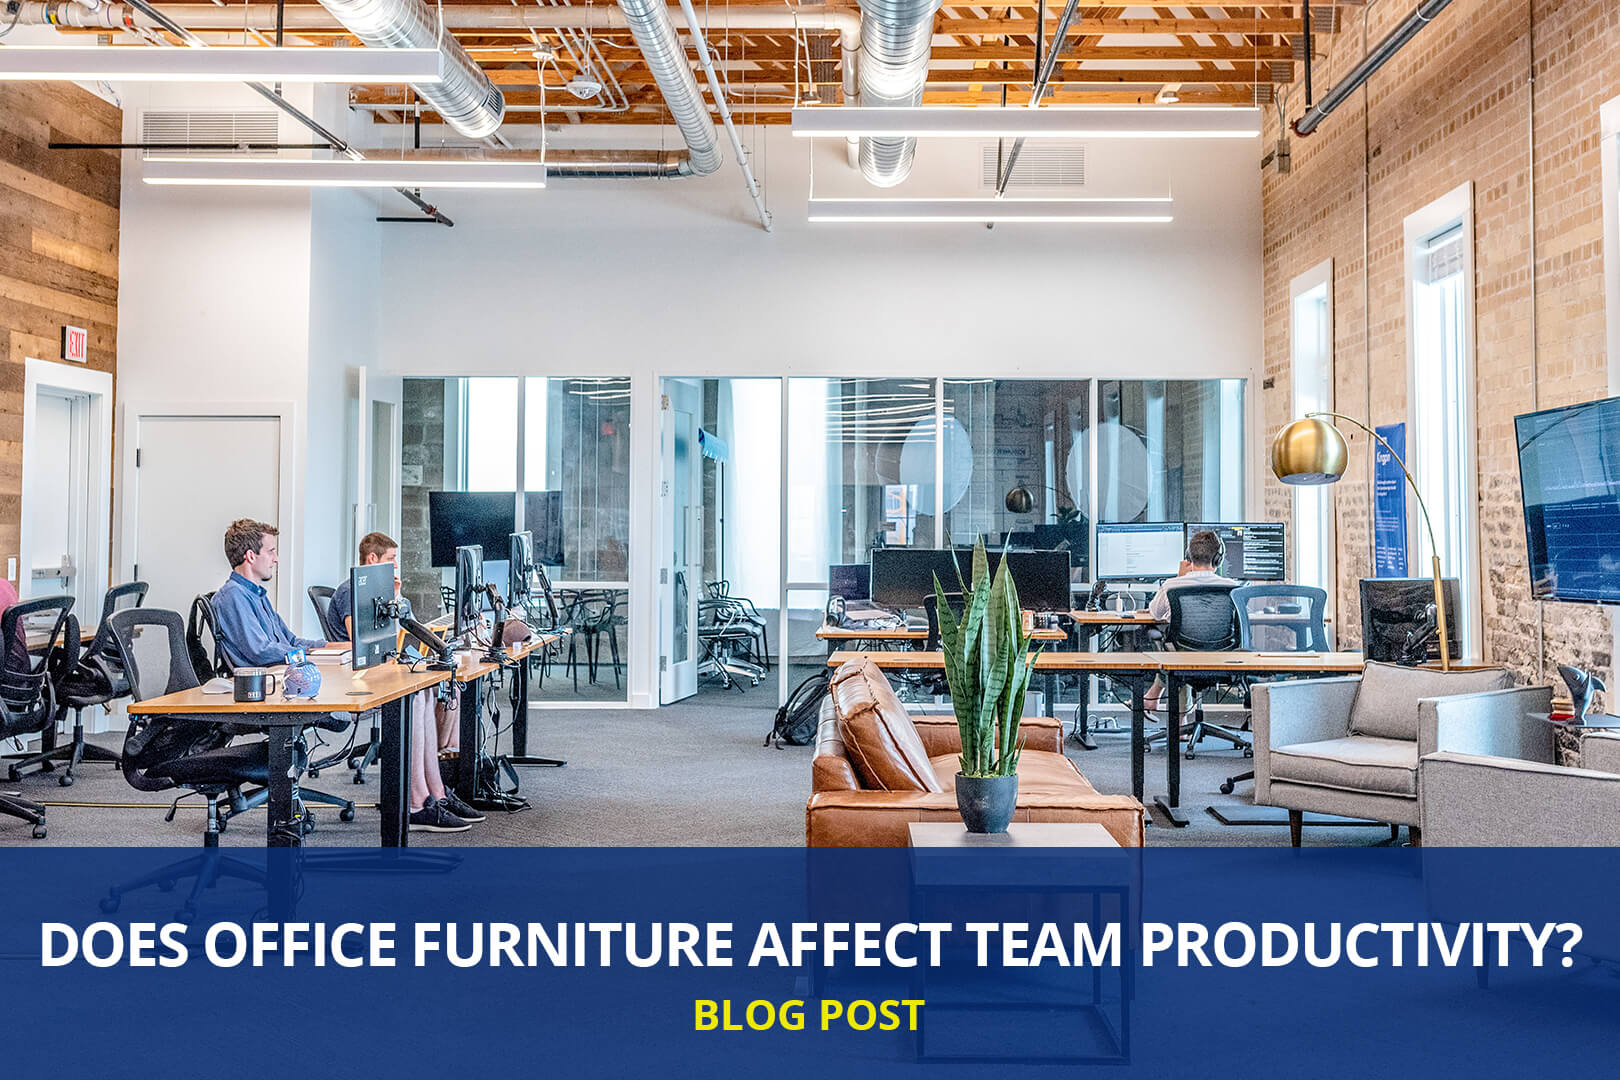 Does Office Furniture Affect Team Productivity?